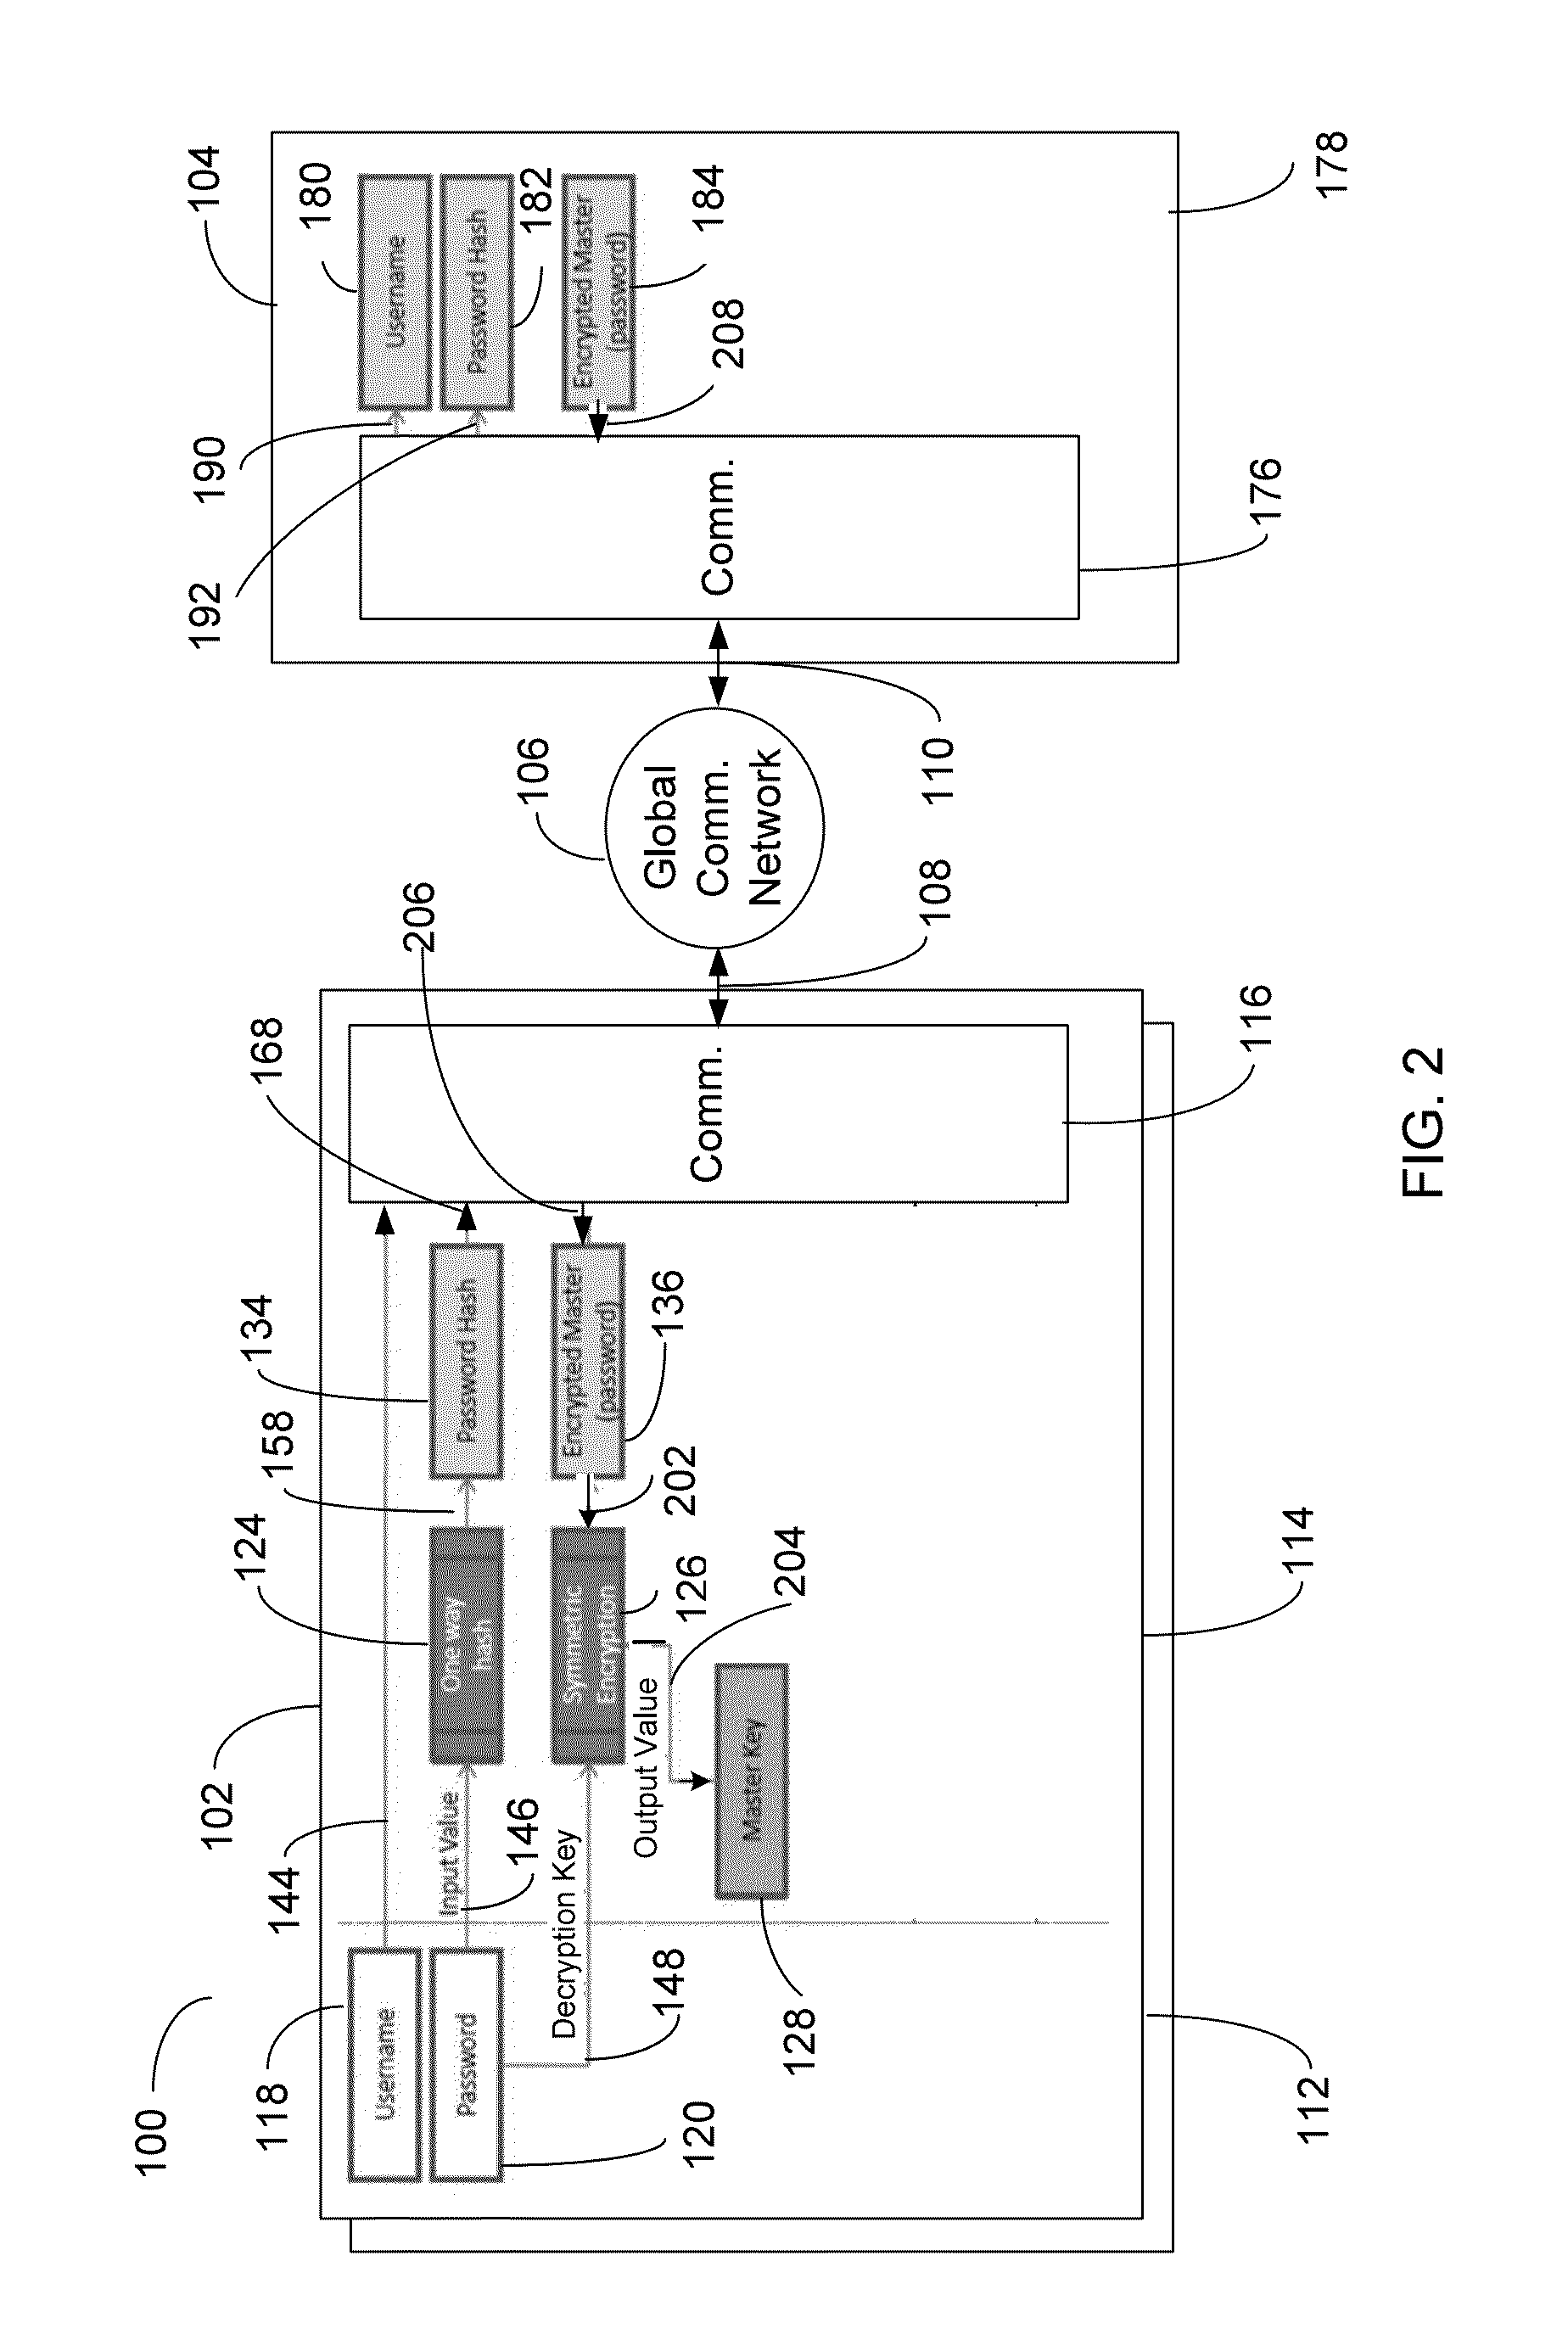 Method, System and Program Product for Secure Storage of Content